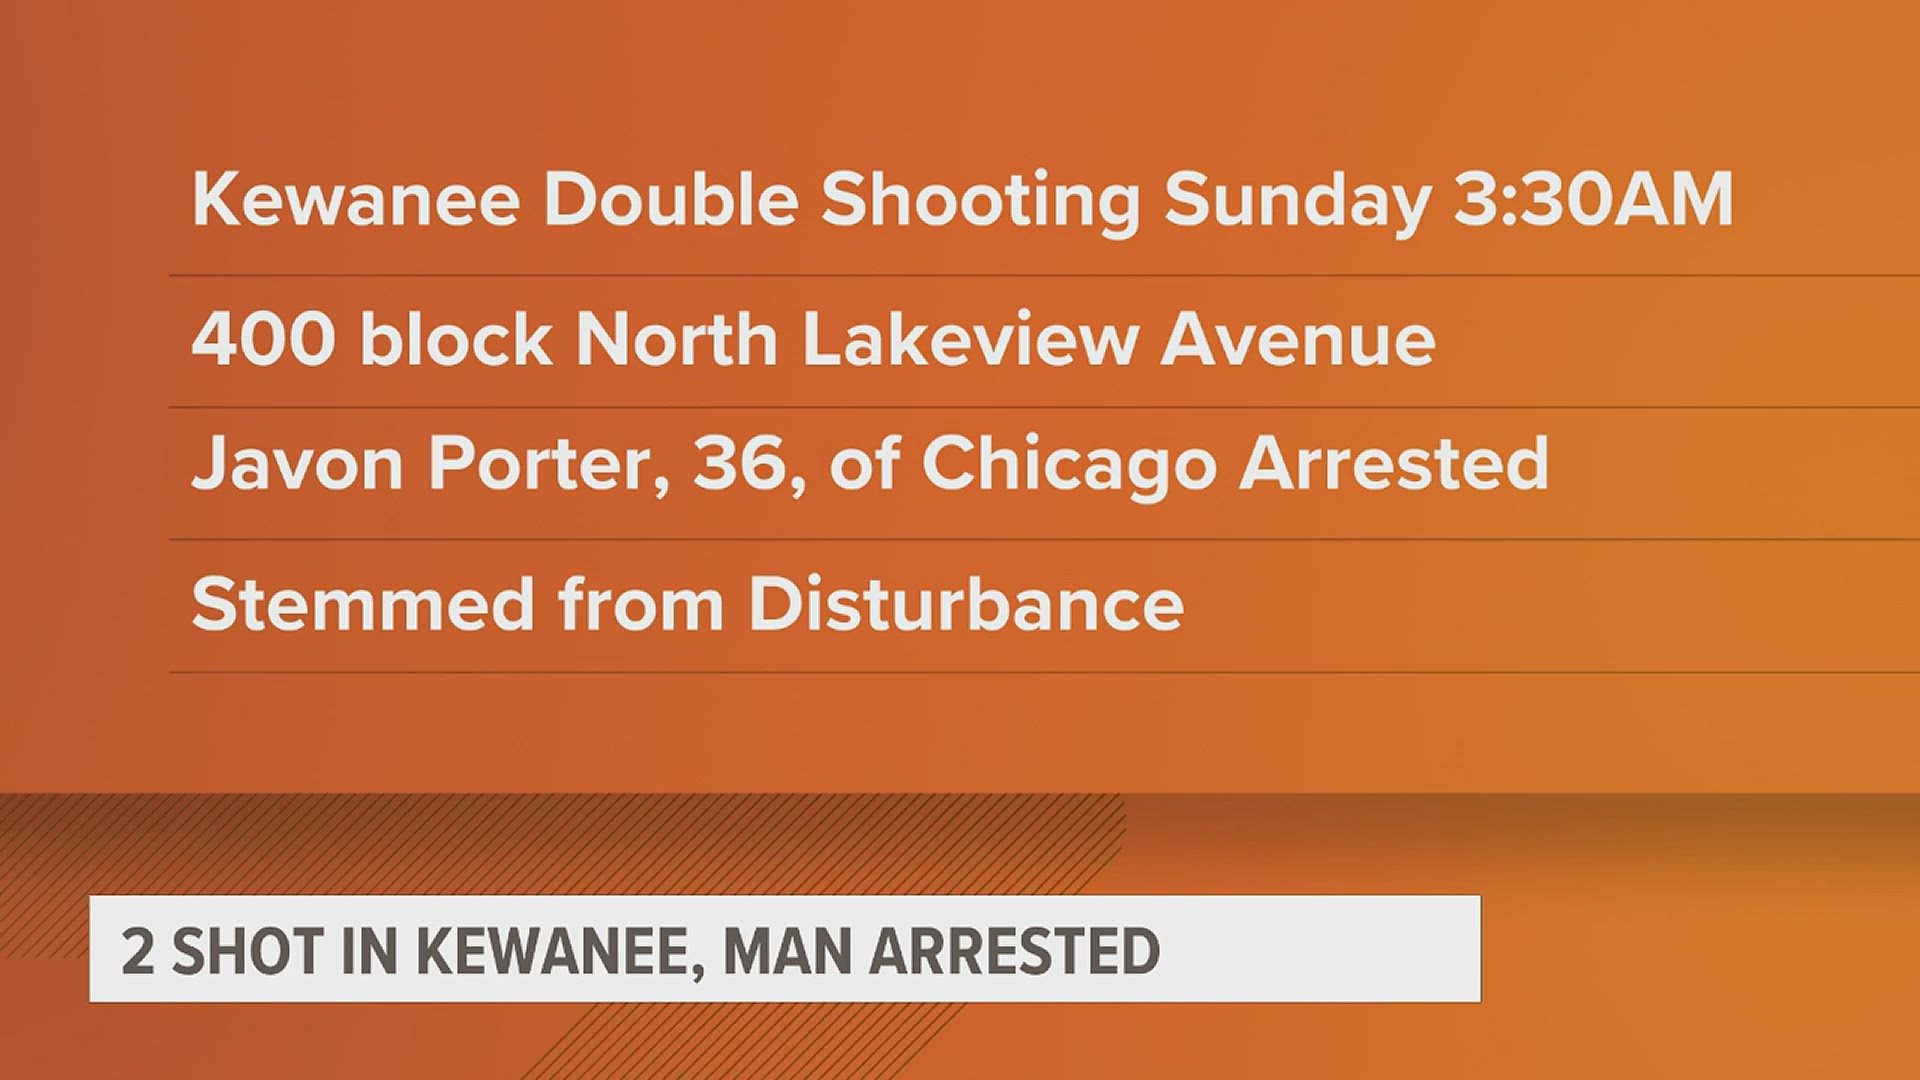 Kewanee police apprehended a man allegedly charged with a double shooting, and Bettendorf police are raising money for cancer.